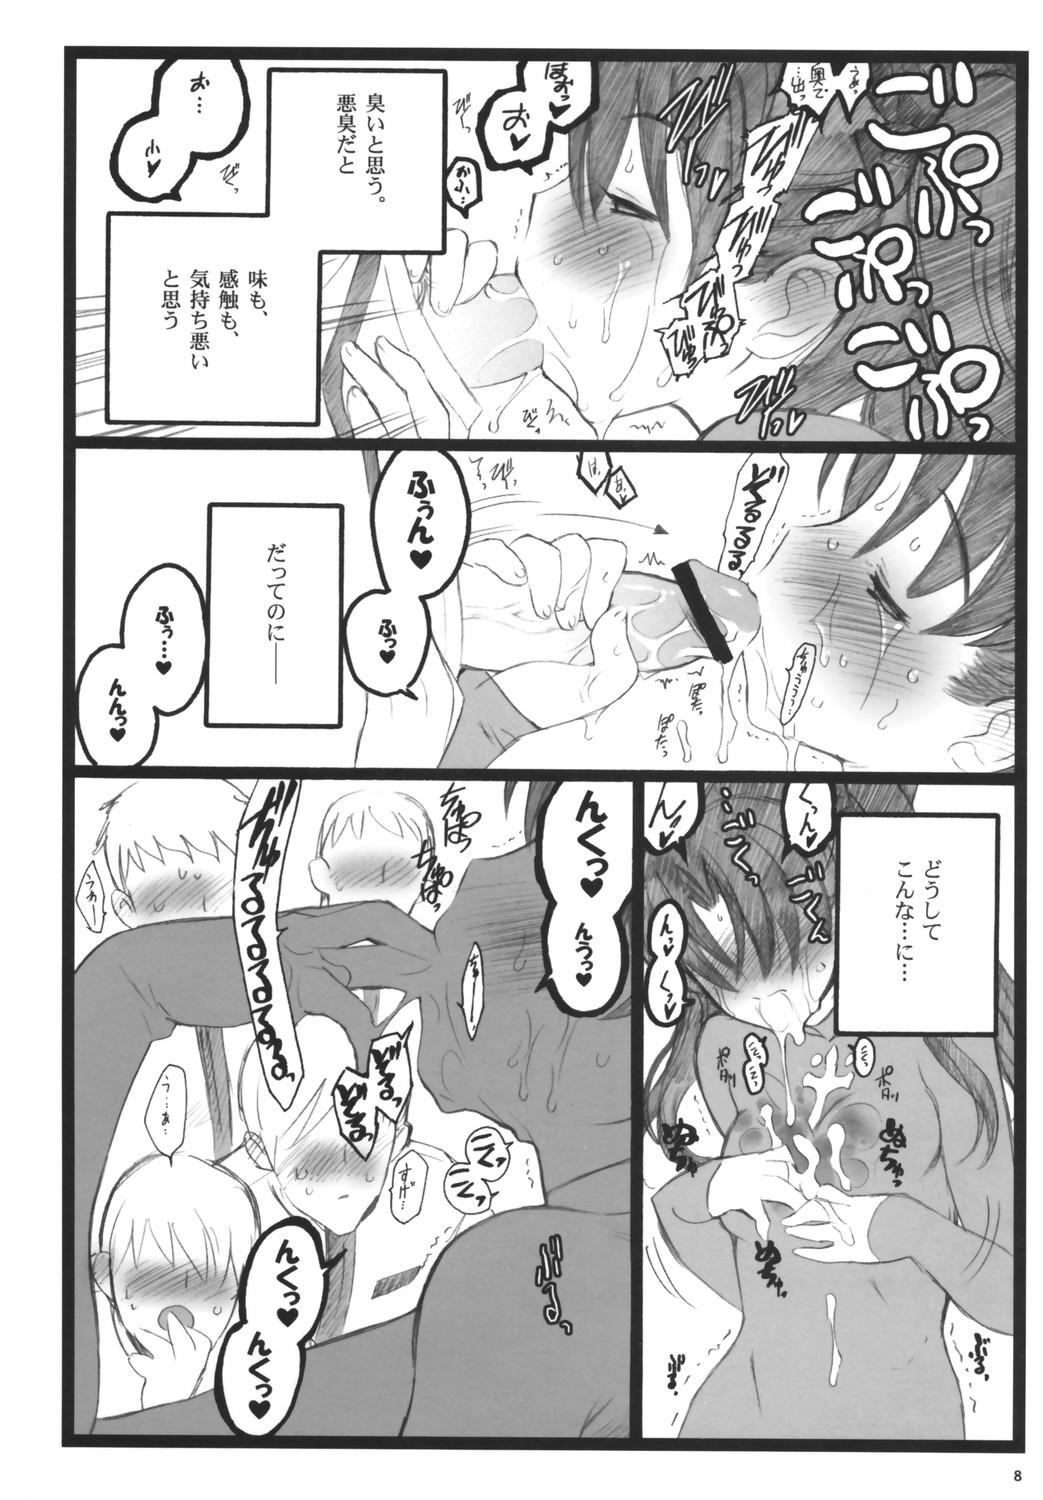 Monster Dick Walpurugisnacht 3 - Fate stay night Best Blowjob Ever - Page 7